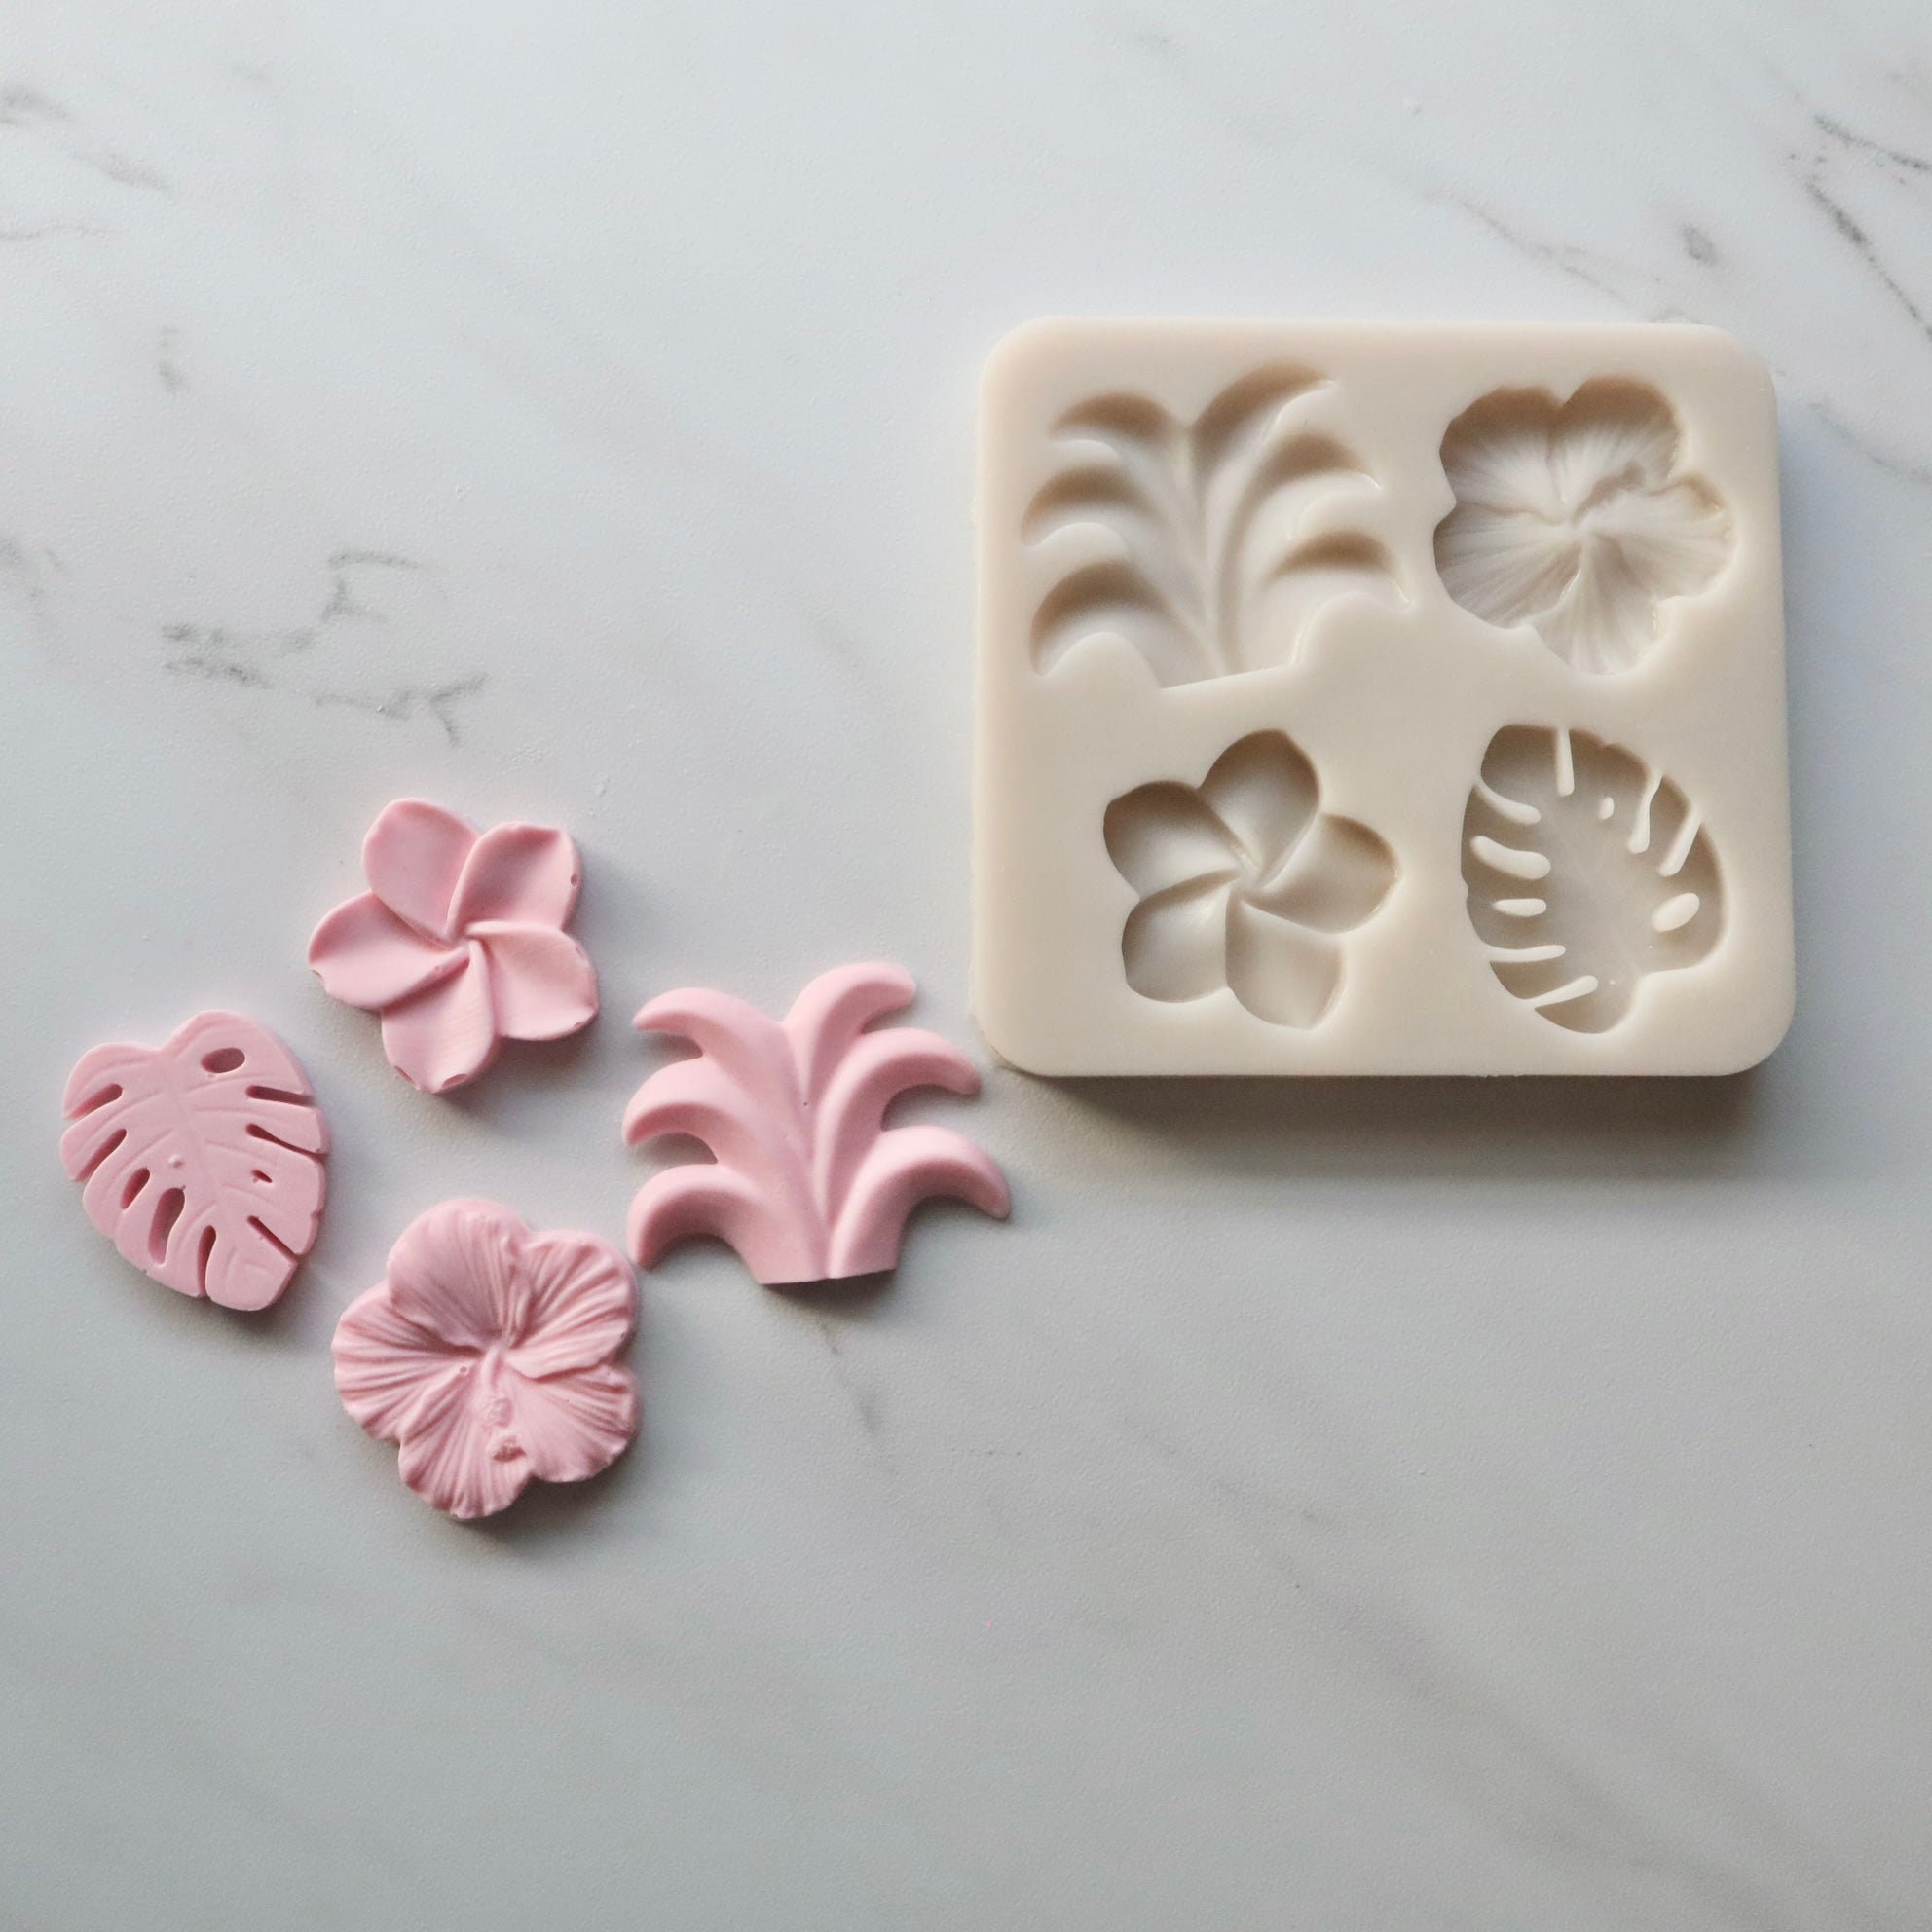 Ripakiya Tropical Flowers Leaves Plumeria Flower Mold Tropical Party Decorations Mold for DIY Chocolate Candy Cake Decorating Silicone Fondant Baking Mould